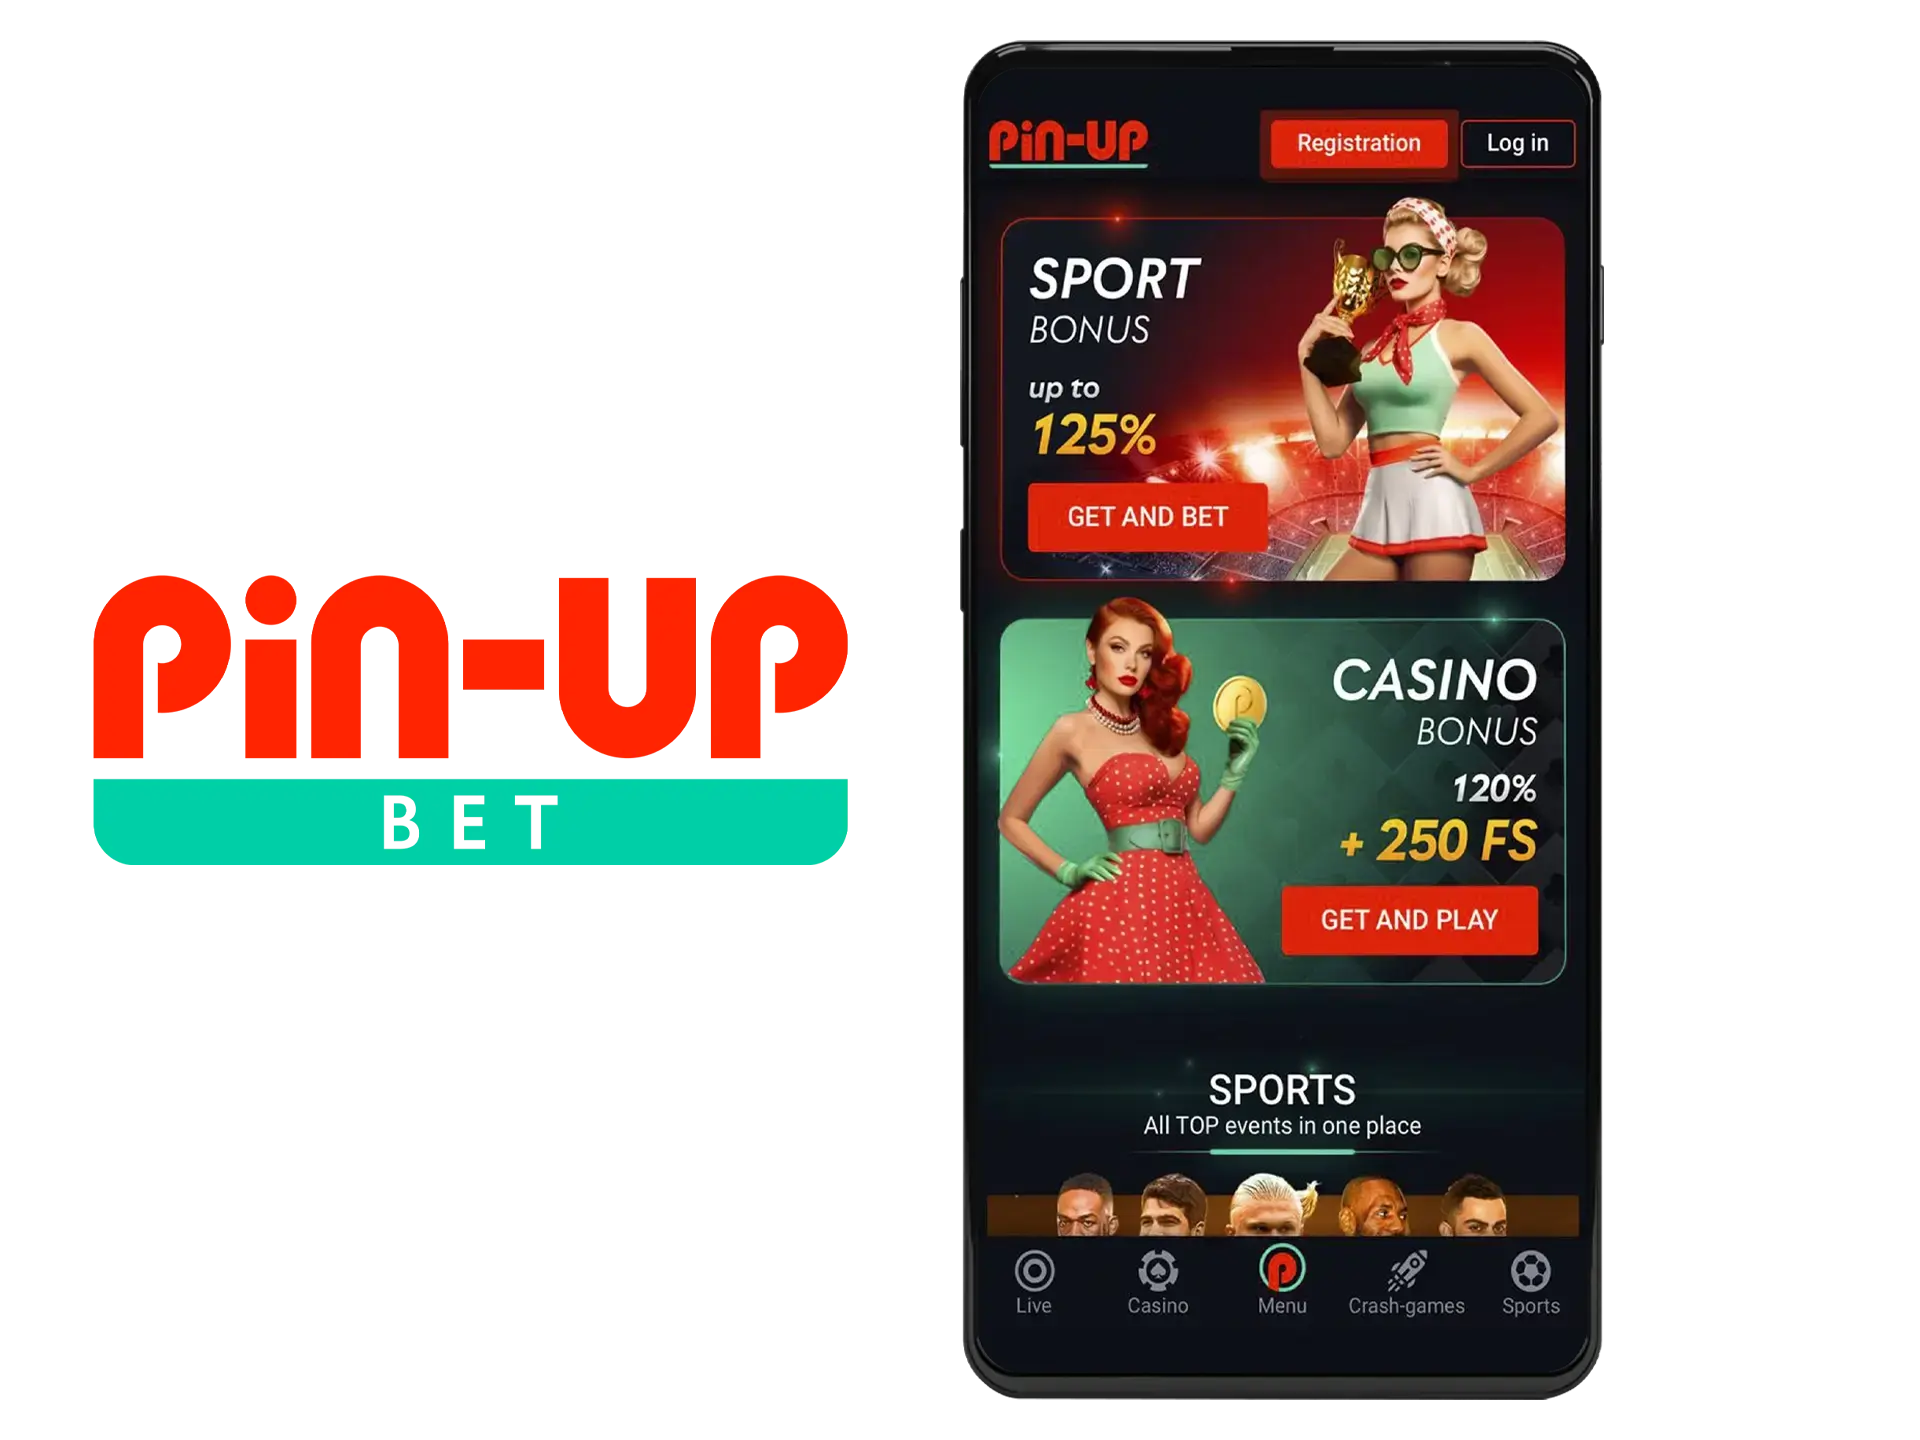 Go to the official website of Pin Up betting.